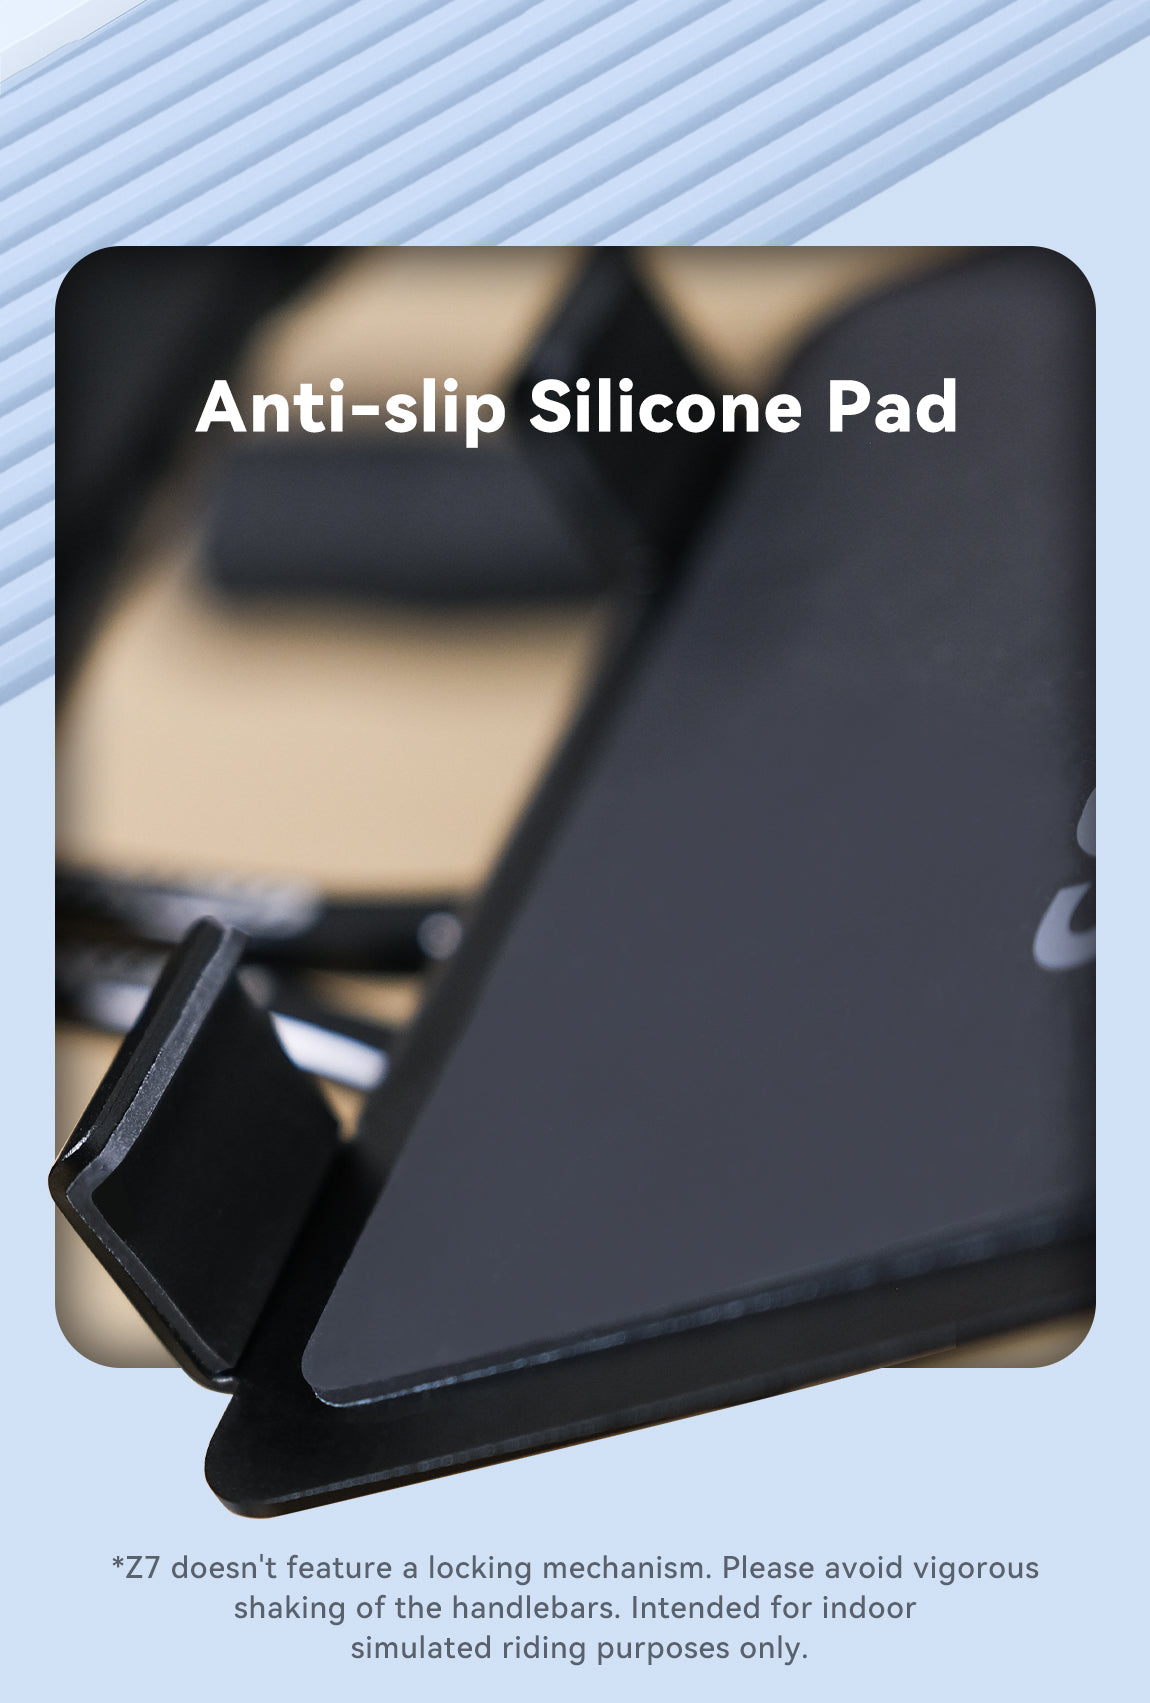 Anti-slip Silicone Pad  *Z7 doesn't feature a locking mechanism. Please avoid vigorous shaking of the handlebars. Intended for indoor simulated riding purposes only.